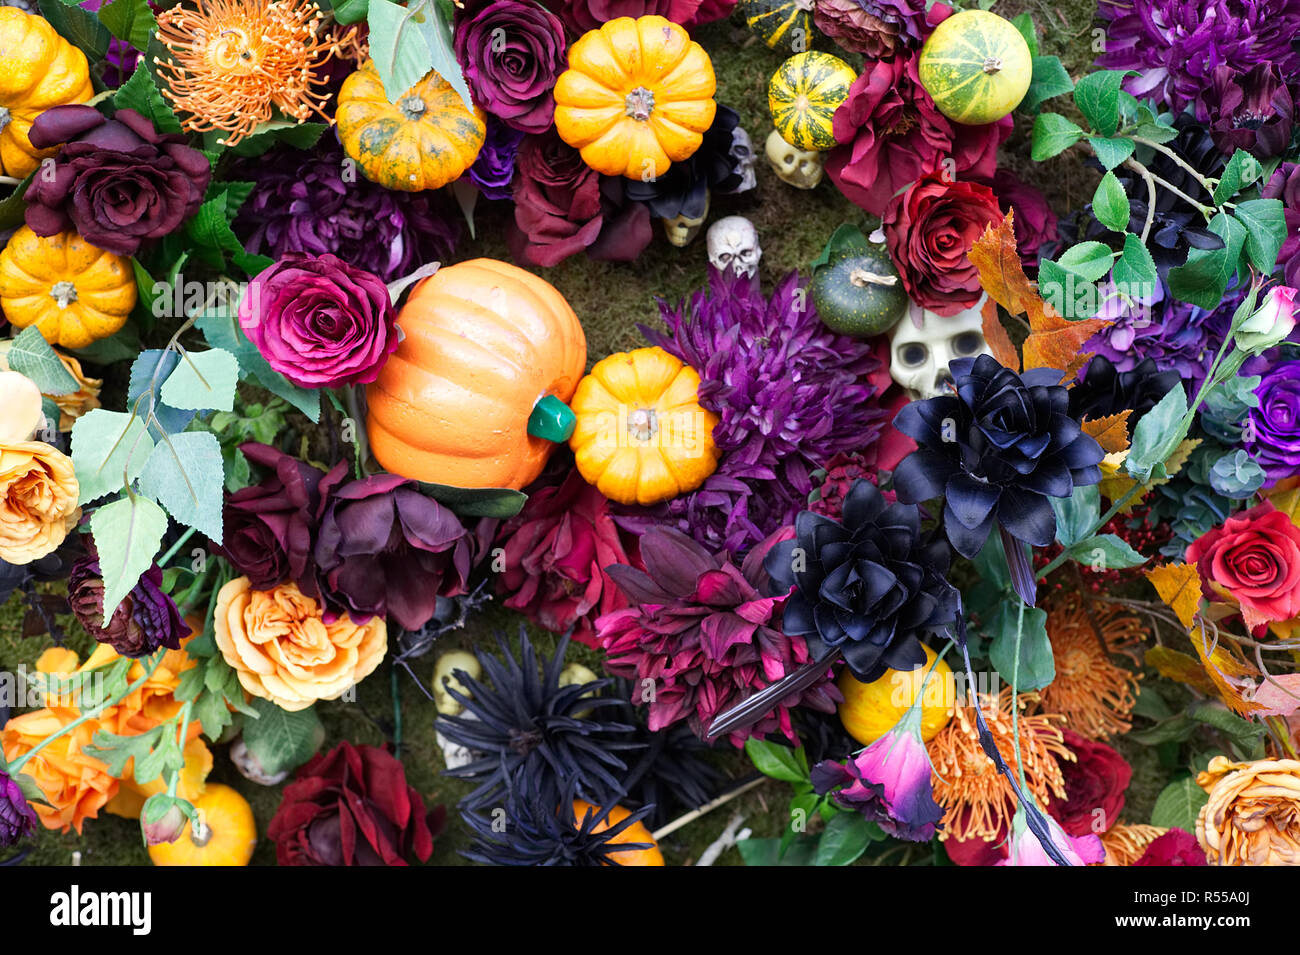 All Hallows eve flower display Stock Photo